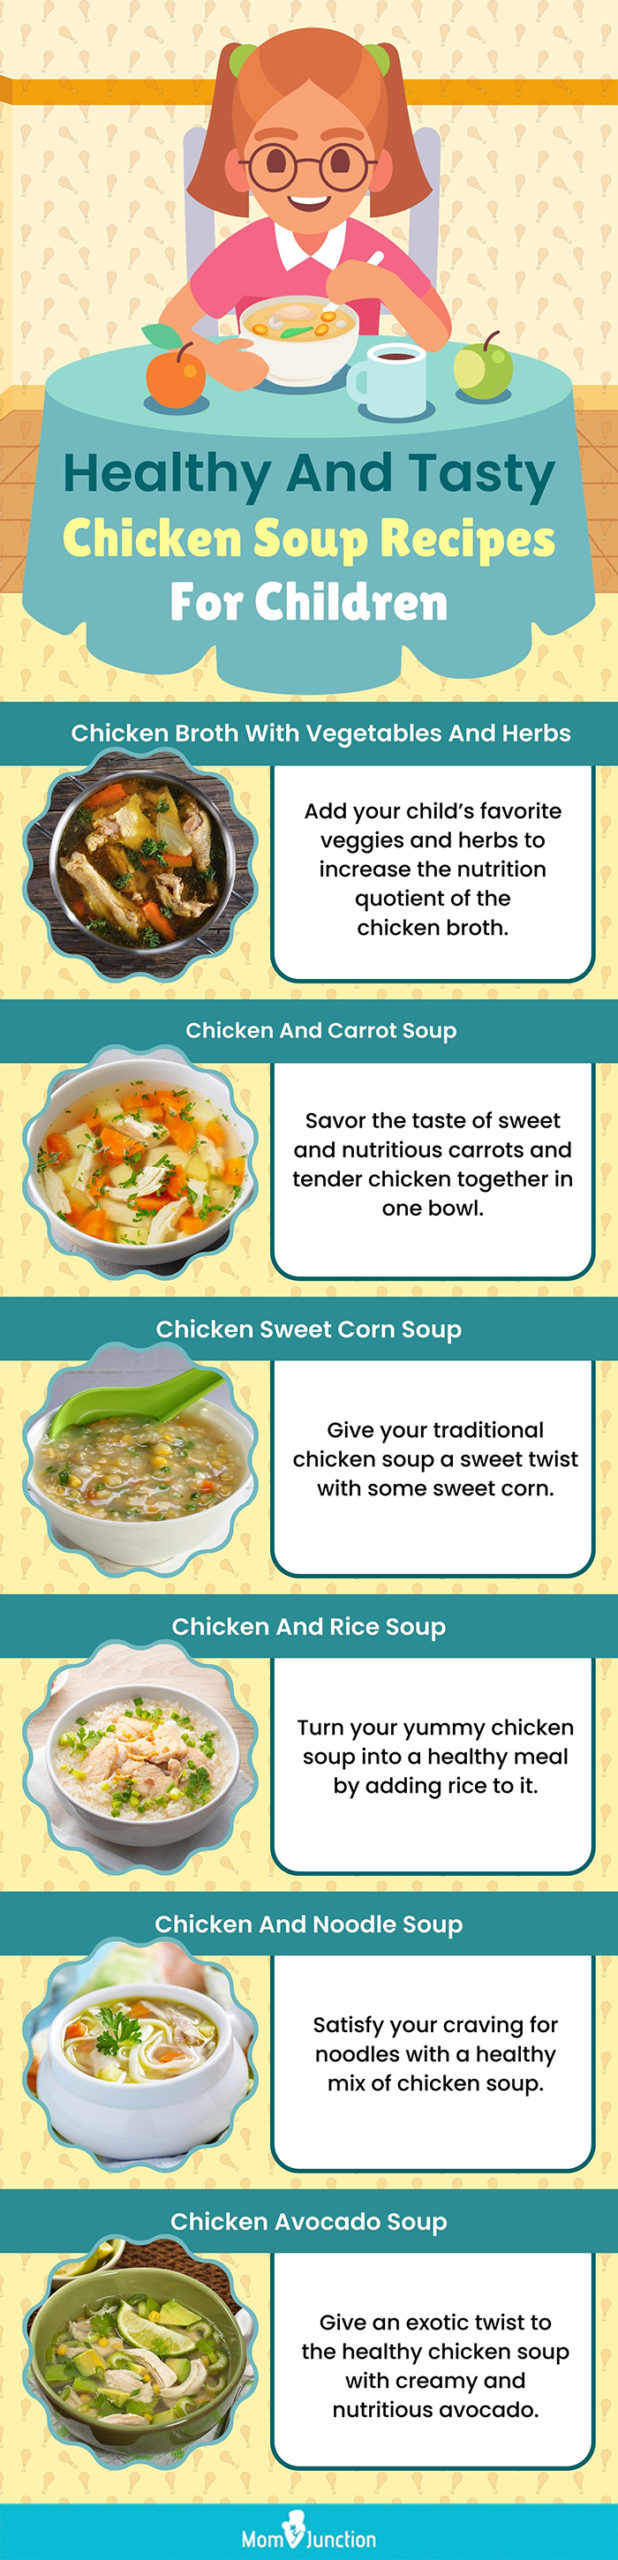 healthy and tasty chicken soup recipes for children (infographic)